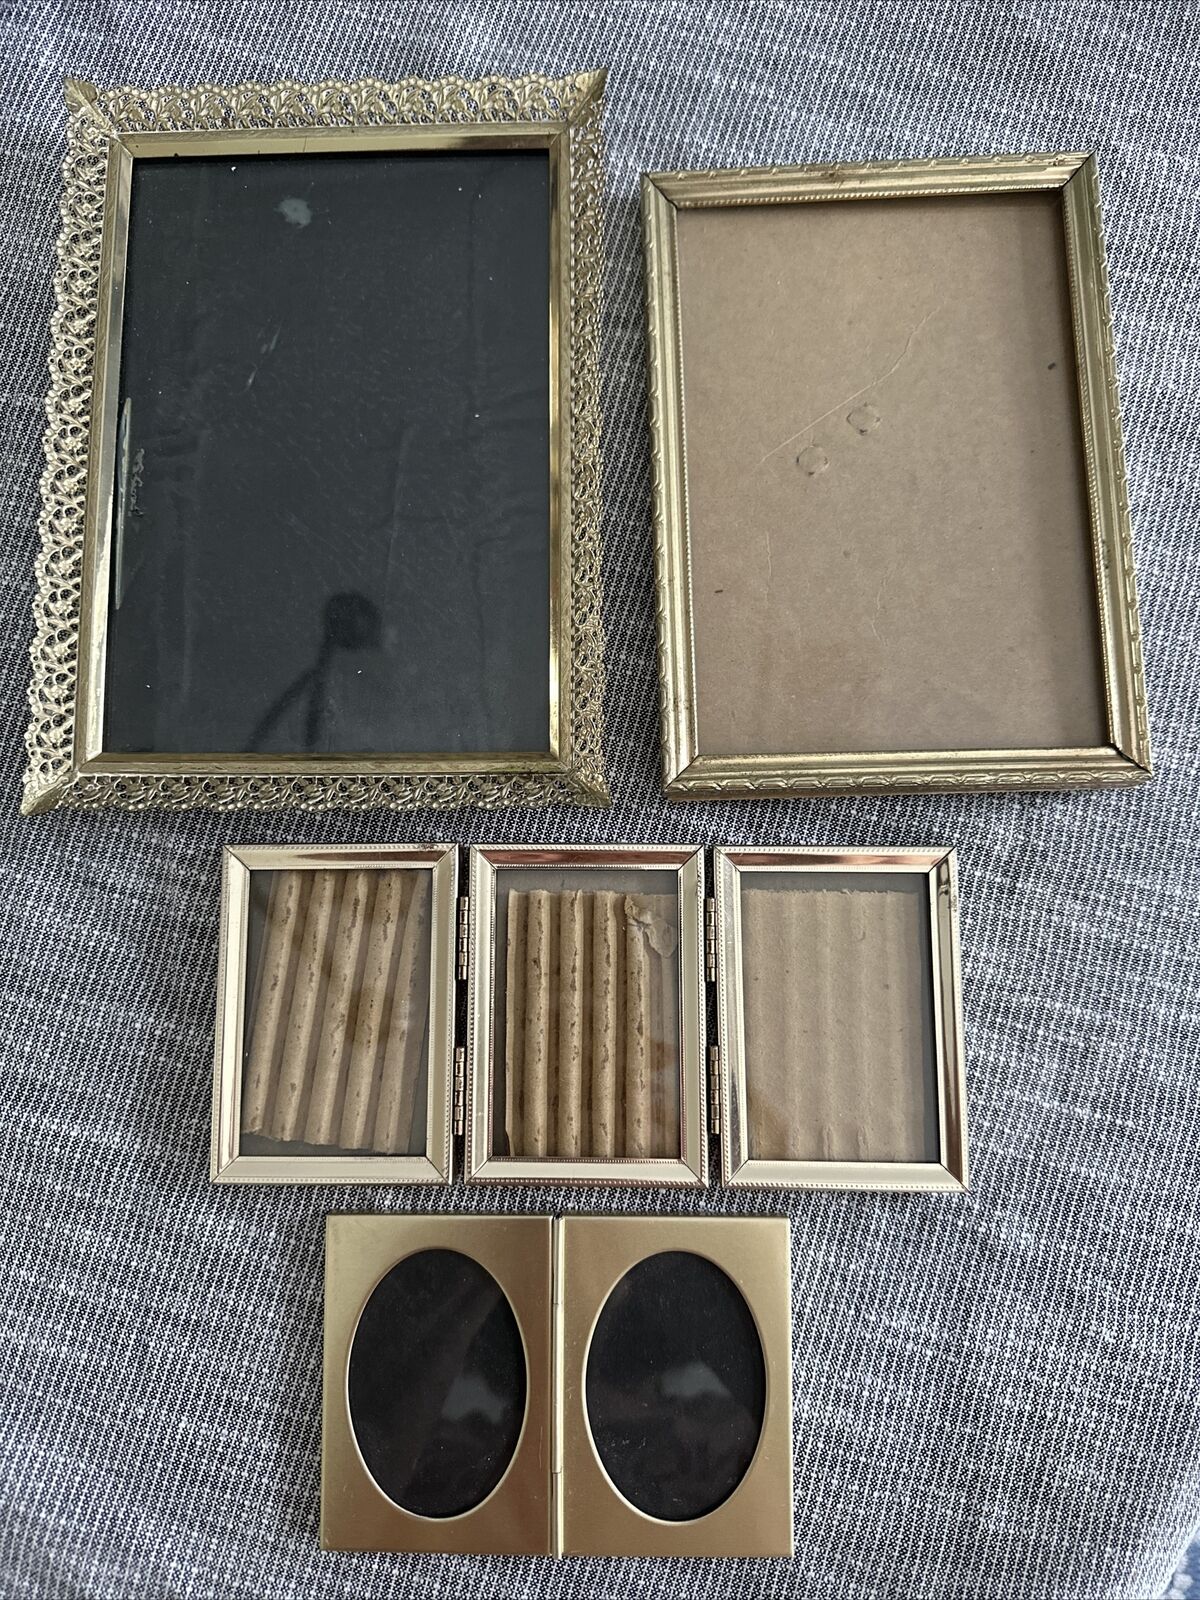 Antique/Vintage Brass Small Photo Picture Frames Lot of 4